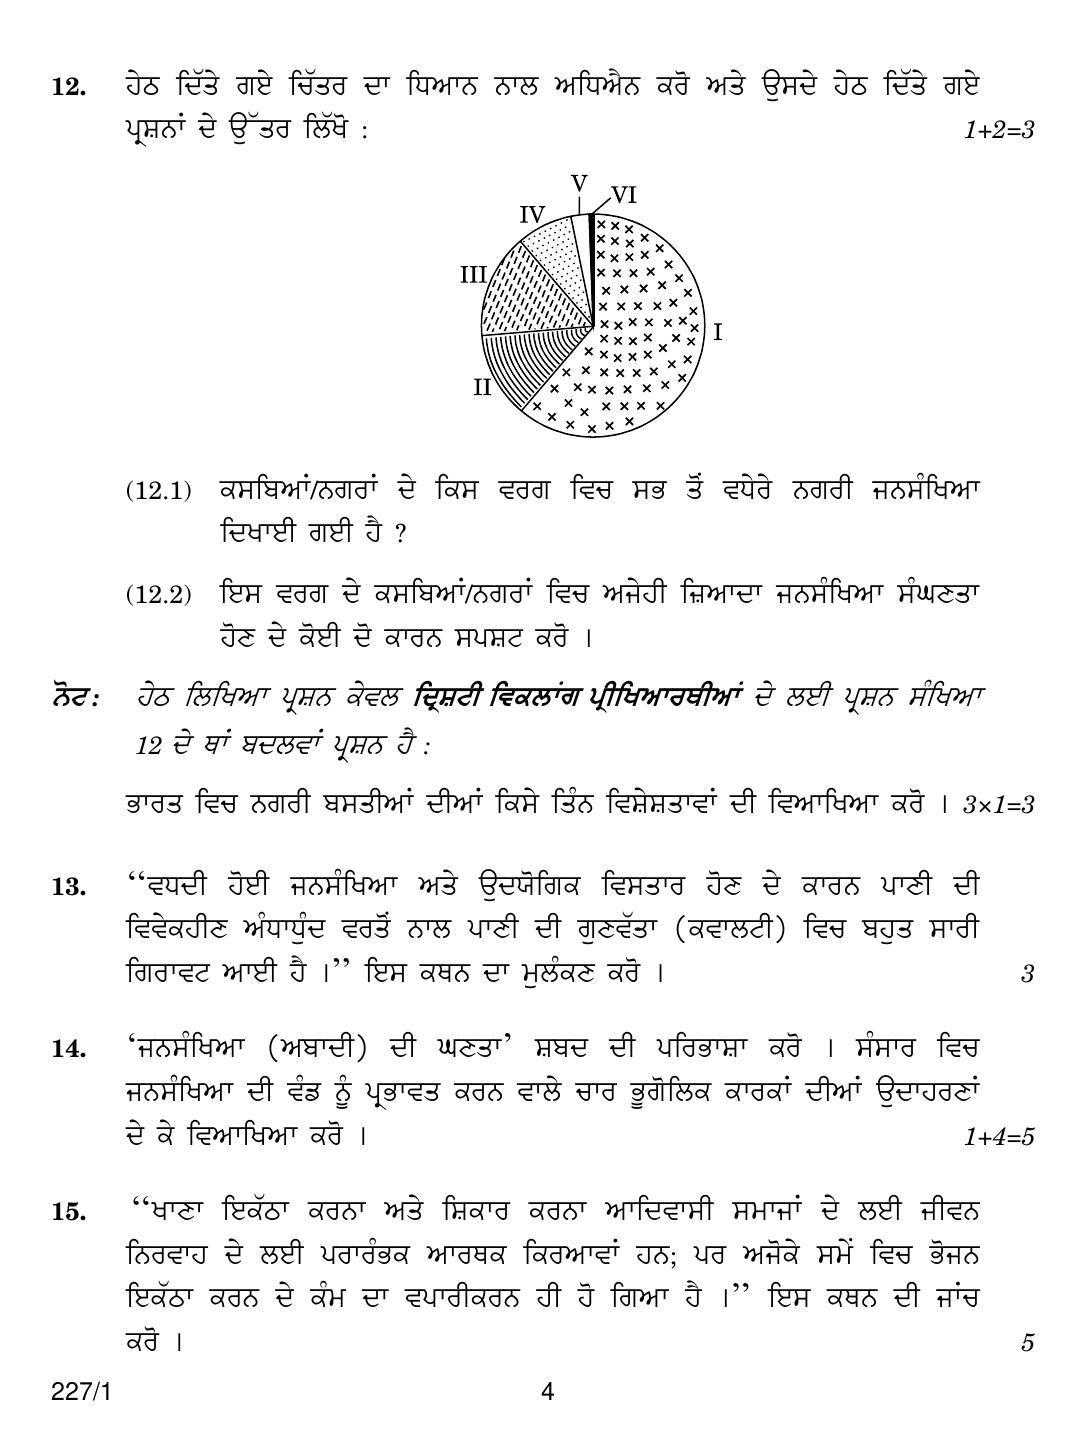 CBSE Class 12 227-1 GEOGRAPHY PUNJABI VERSION 2018 Question Paper - Page 4